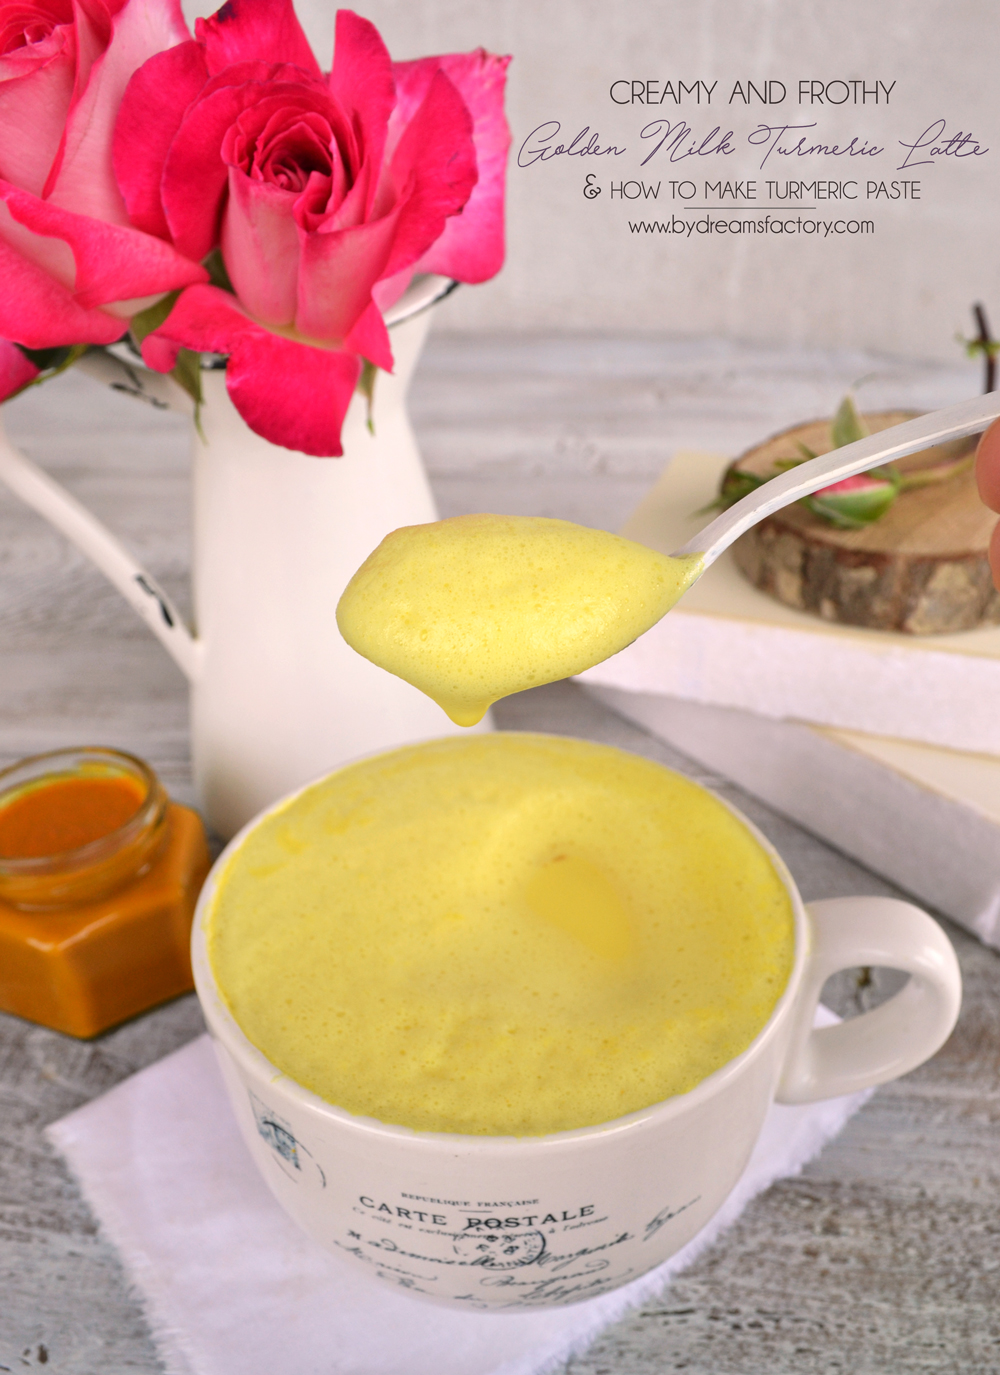 Try this creamy and frothy golden milk turmeric latte (from turmeric paste), a comforting drink with anti inflammatory healing properties & an amazing taste @bydreamsfactory